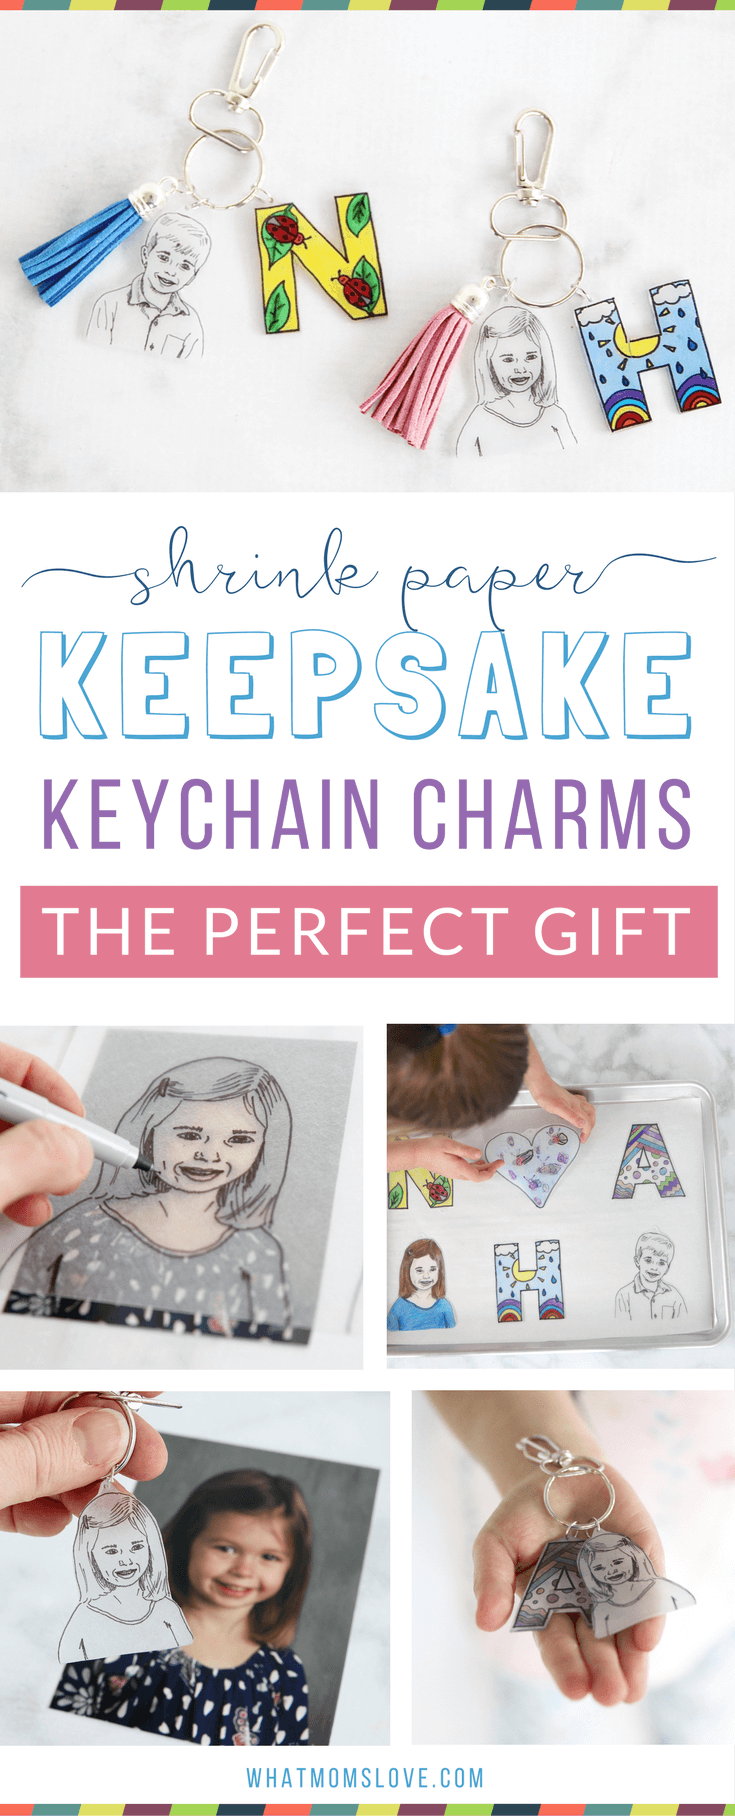 This easy to make Mother's or Father's Day craft for kids is the perfect homemade keepsake to give to mom, dad, grandma or grandpa. Use Shrinky Dinks to create a DIY initial and headshot keychain - they're simple to make but totally unique. Anyone can make them, from toddlers to teens. Makes a great last minute gift from the kids or grandkids for Mother's Day, Father's Day, Grandparents Day, birthdays or Christmas!